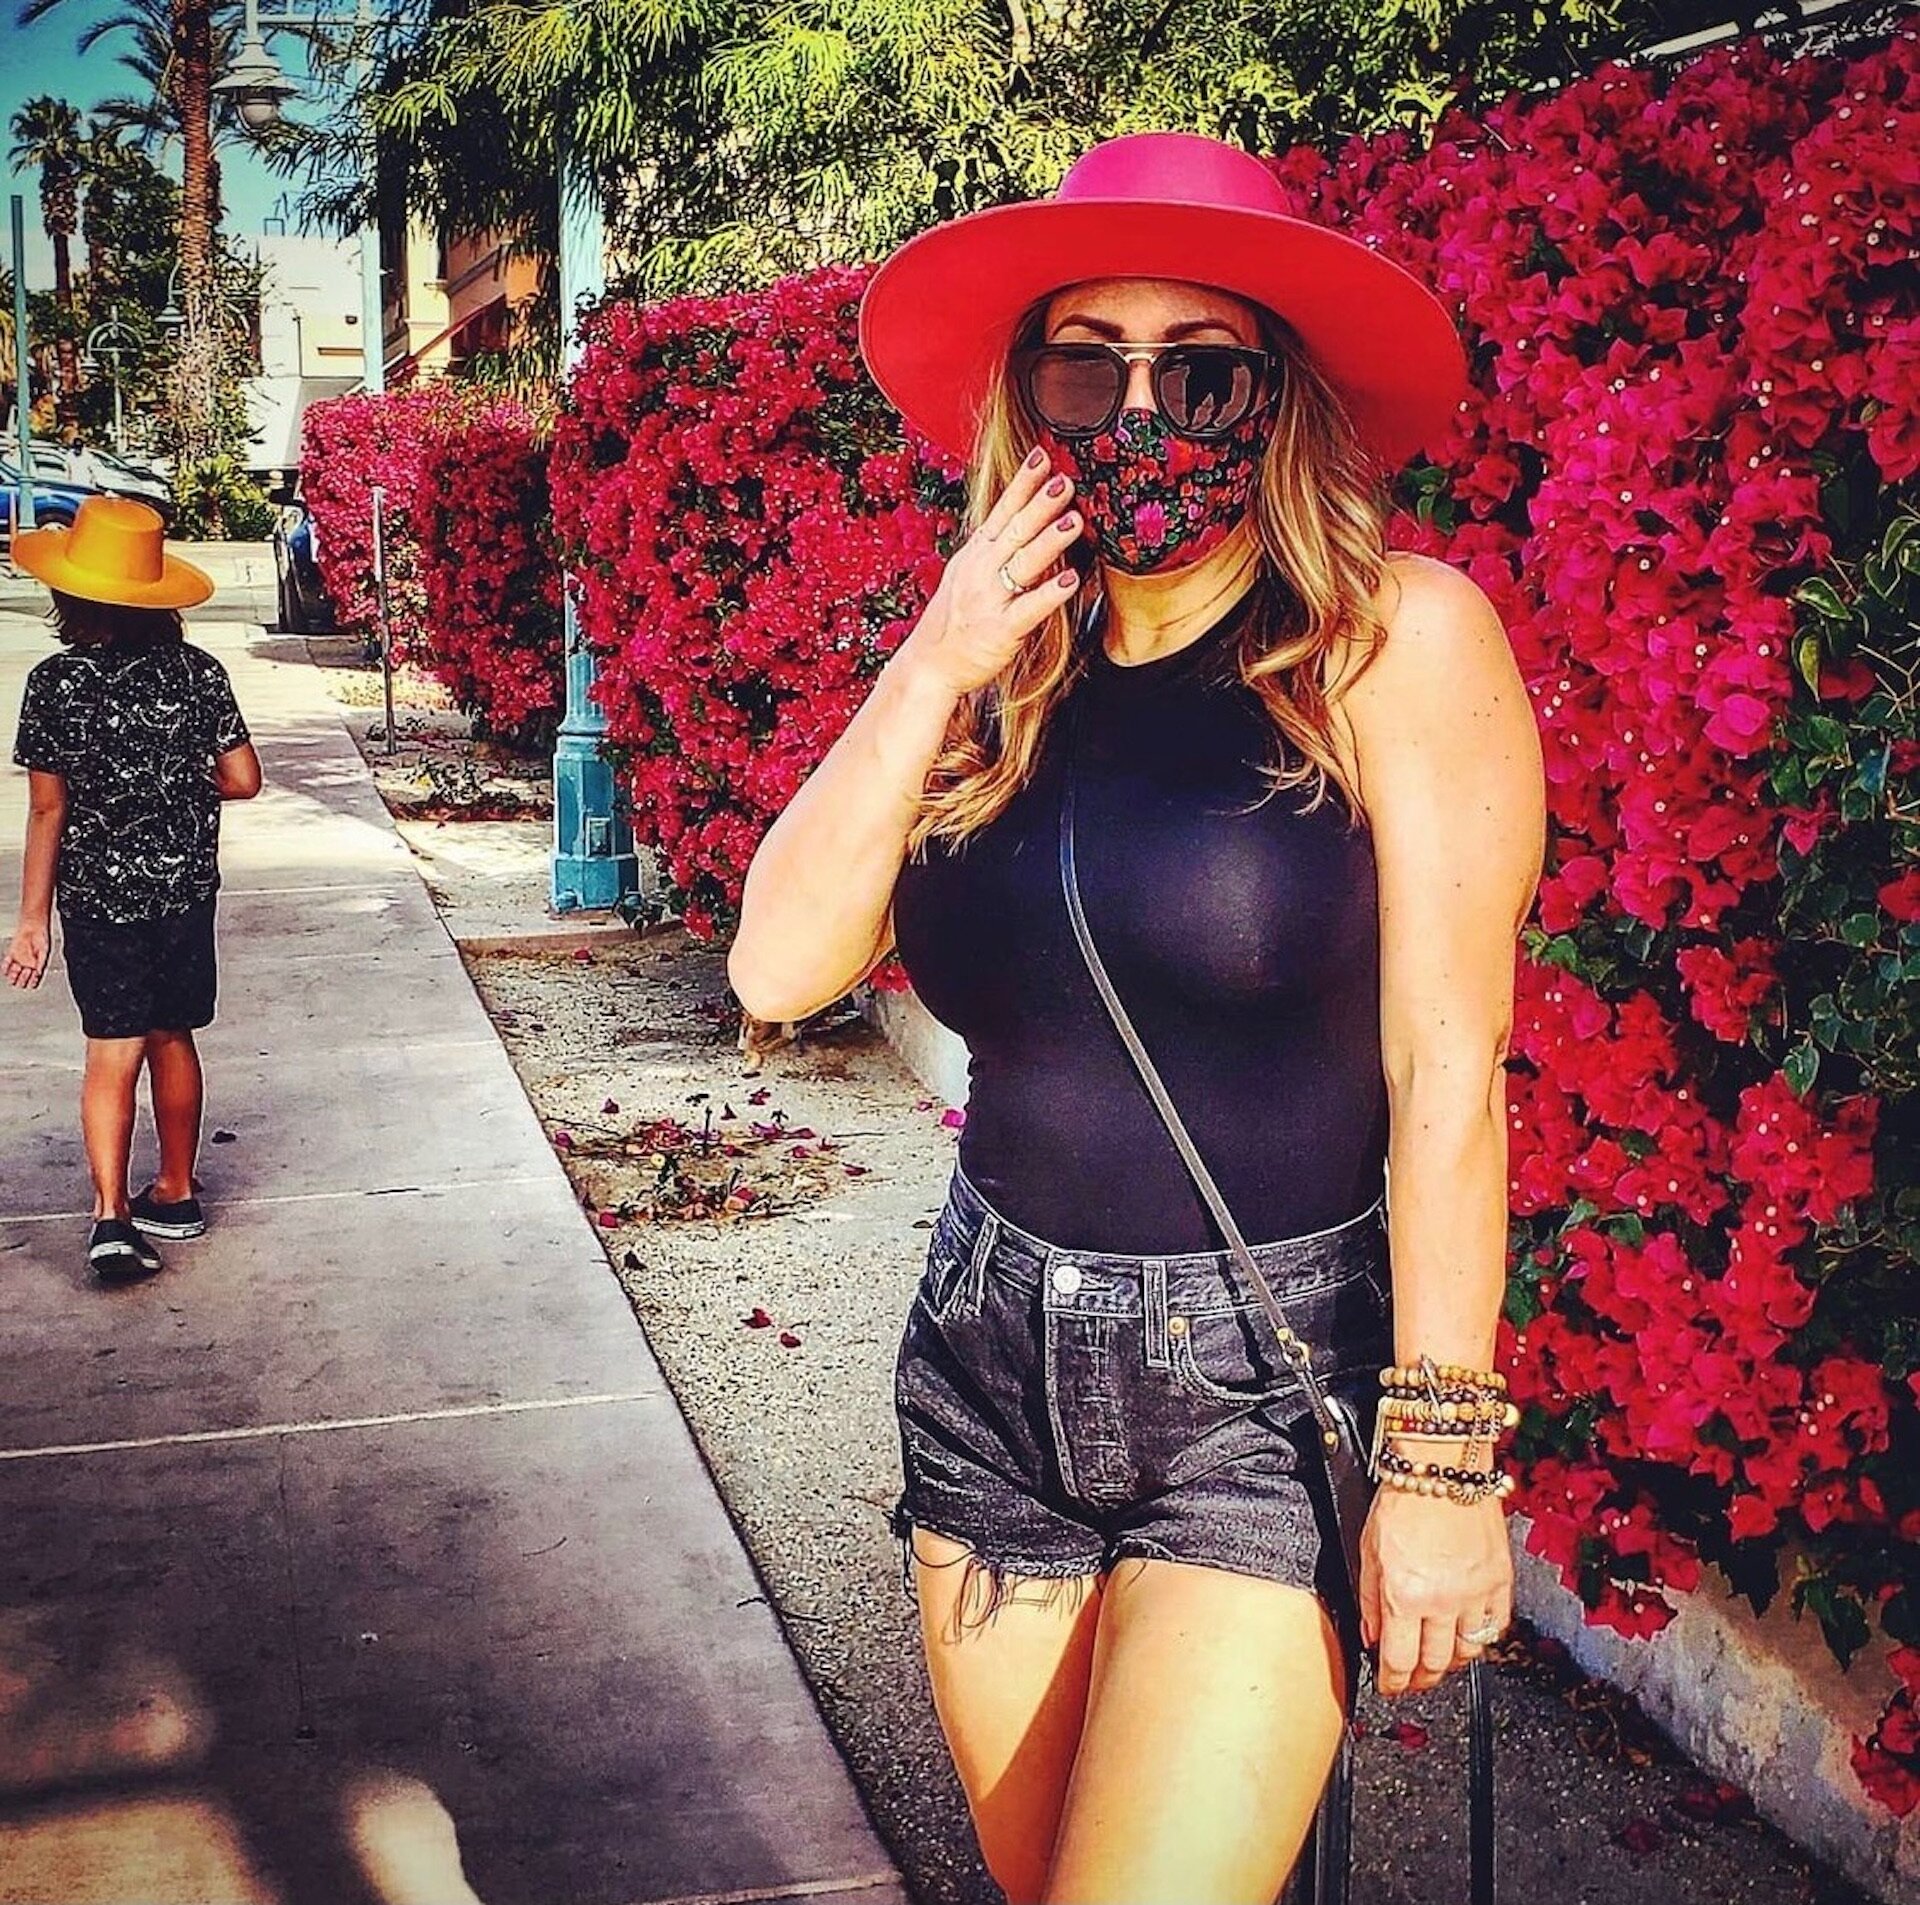 superbloom-shopping-palm-springs-pink-bright-colorful-hat.JPG